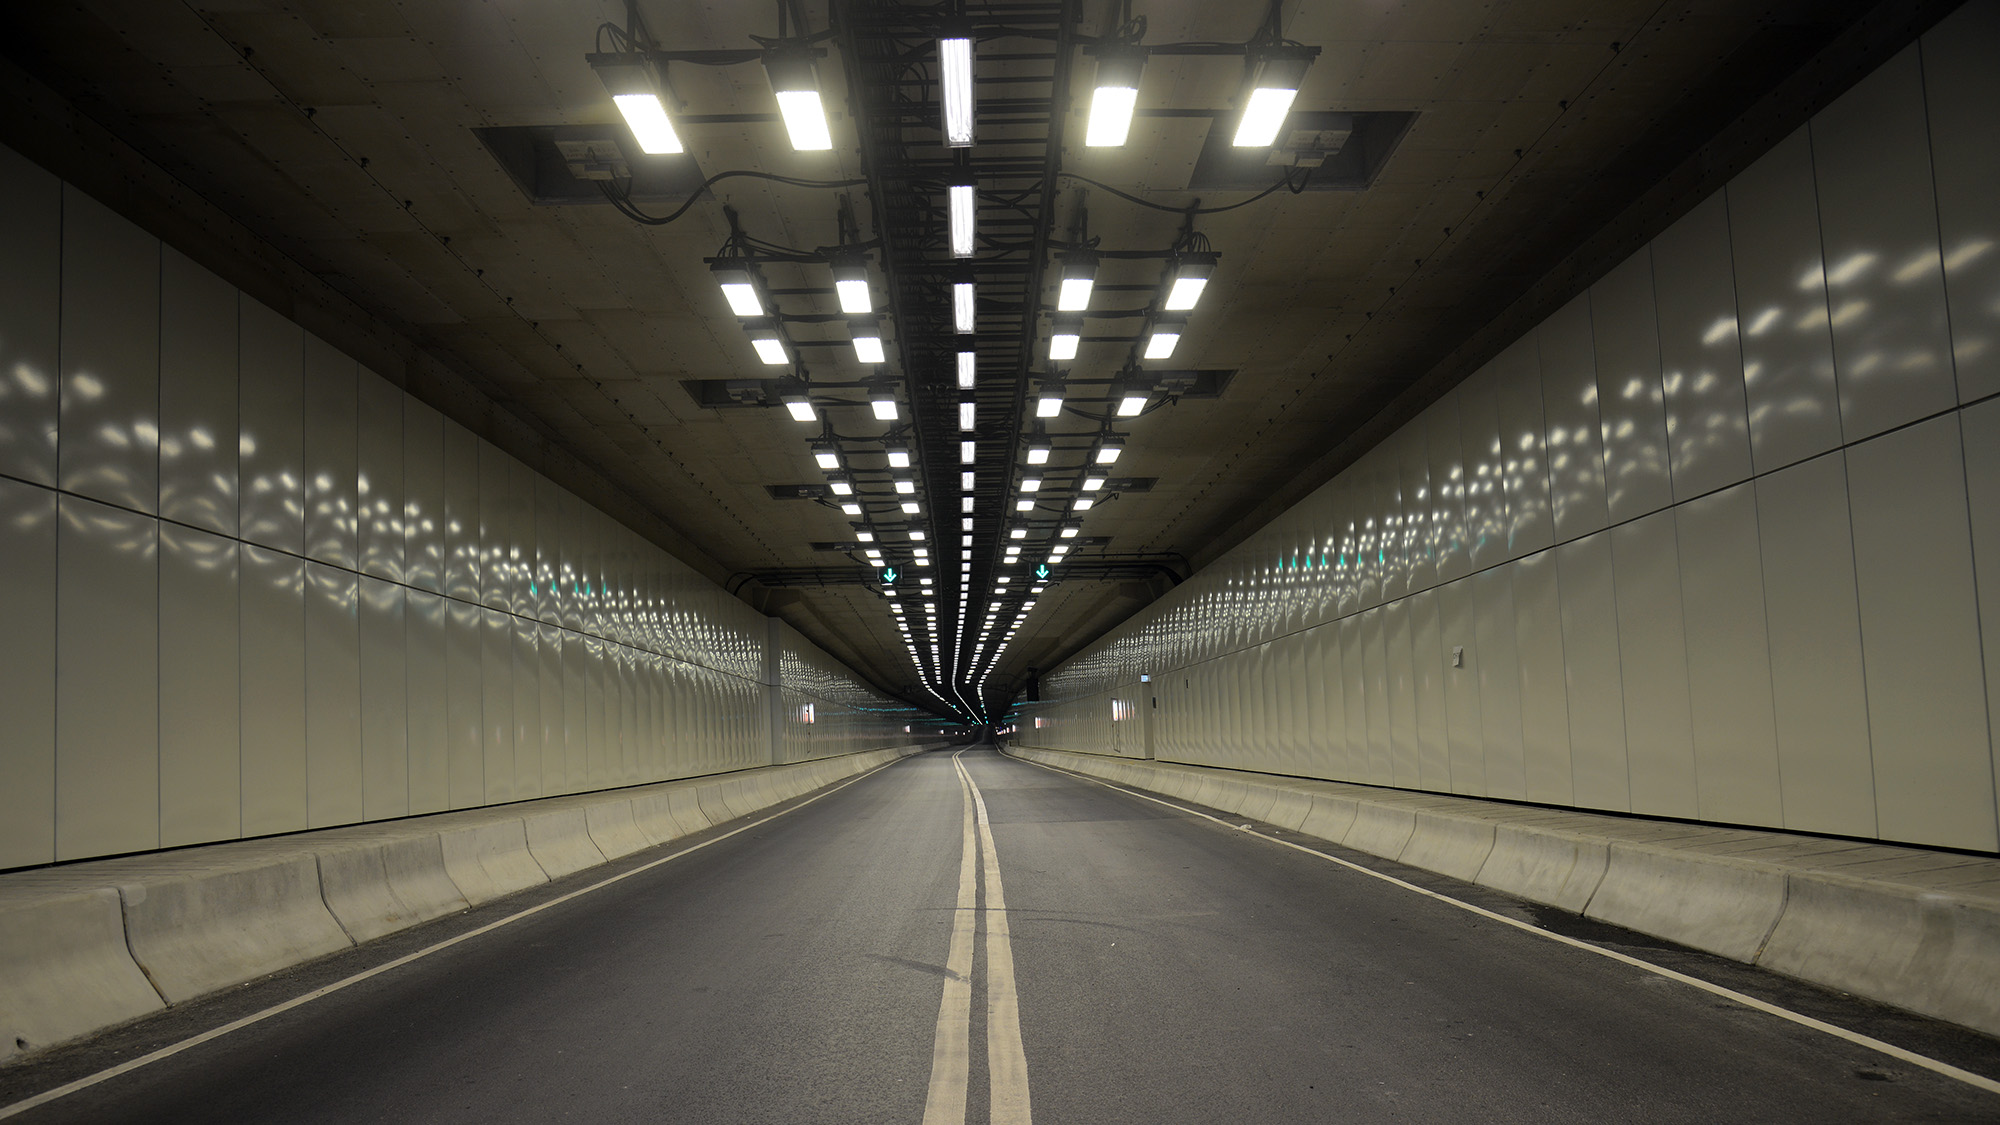 Tuen Mun-Chek Lap Kok Link Northern Connection Tunnel  ©Dragages